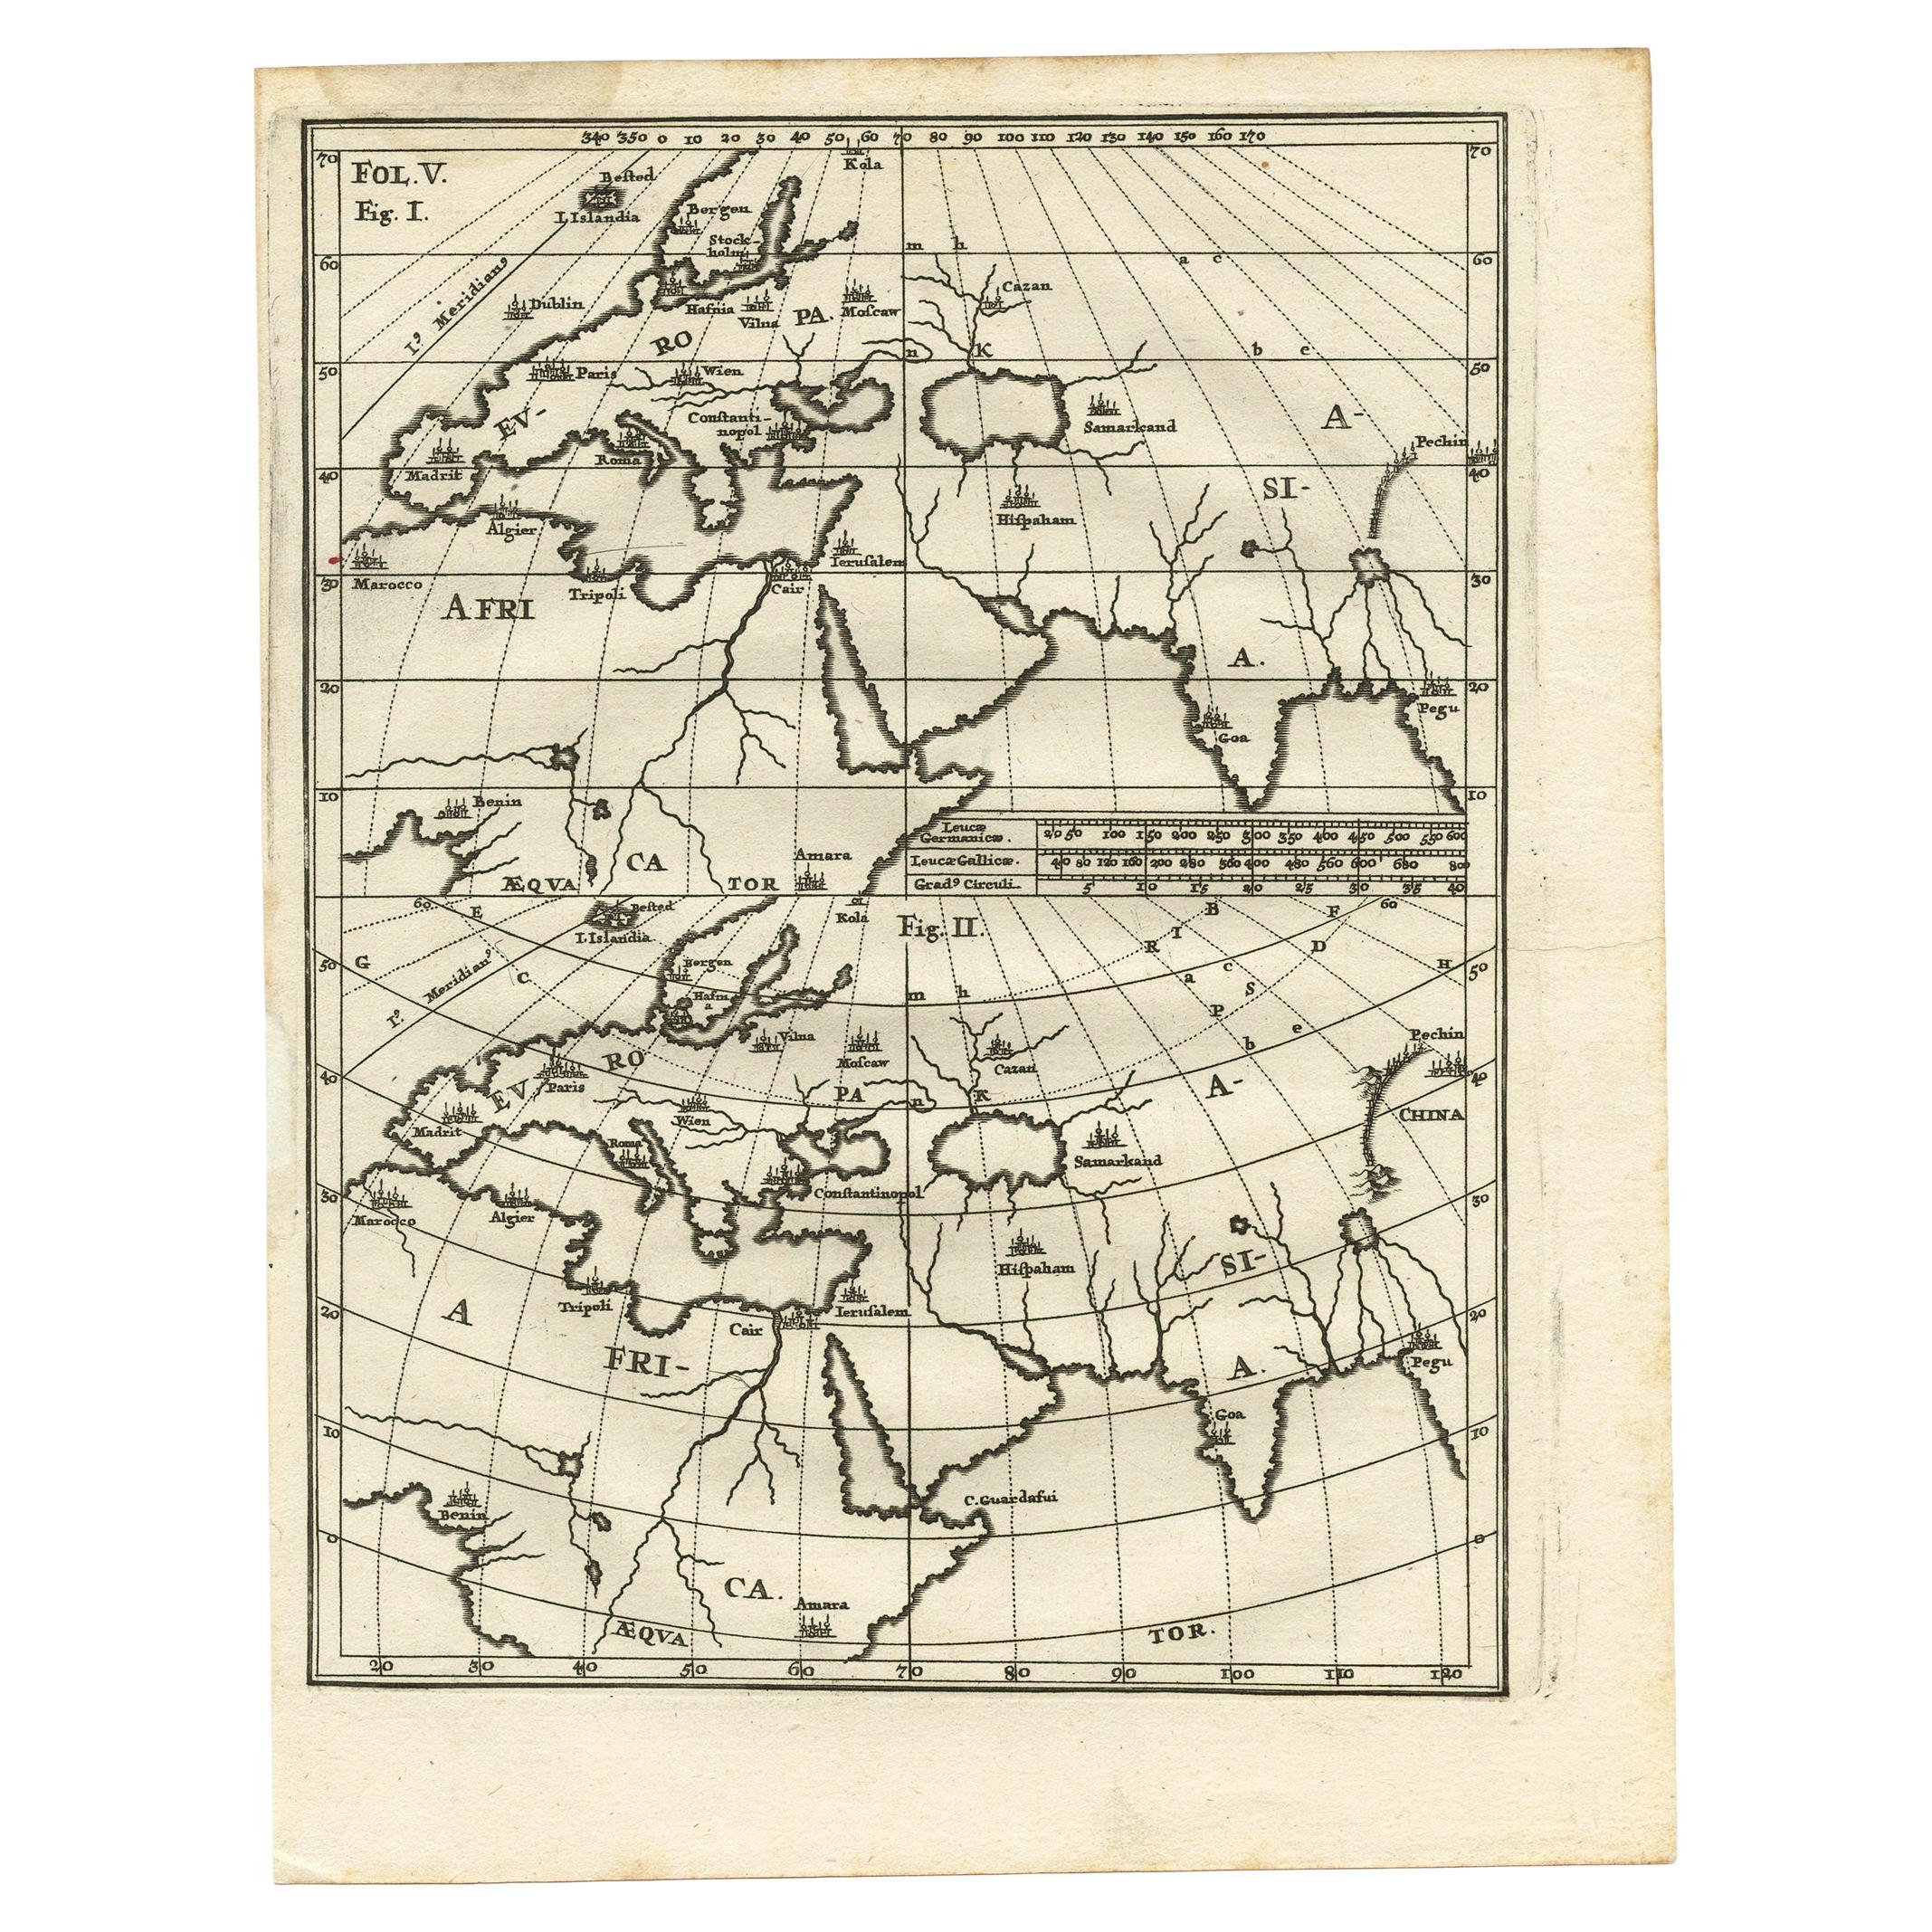 Two maps on a single sheet showing Europe, Asia and Africa, each depicting nearly the same area. On close examination there are slight differences. Major cities are located. Printed for Scherer's 'Atlas Novus' (1702-1710). 

Artists and Engravers: